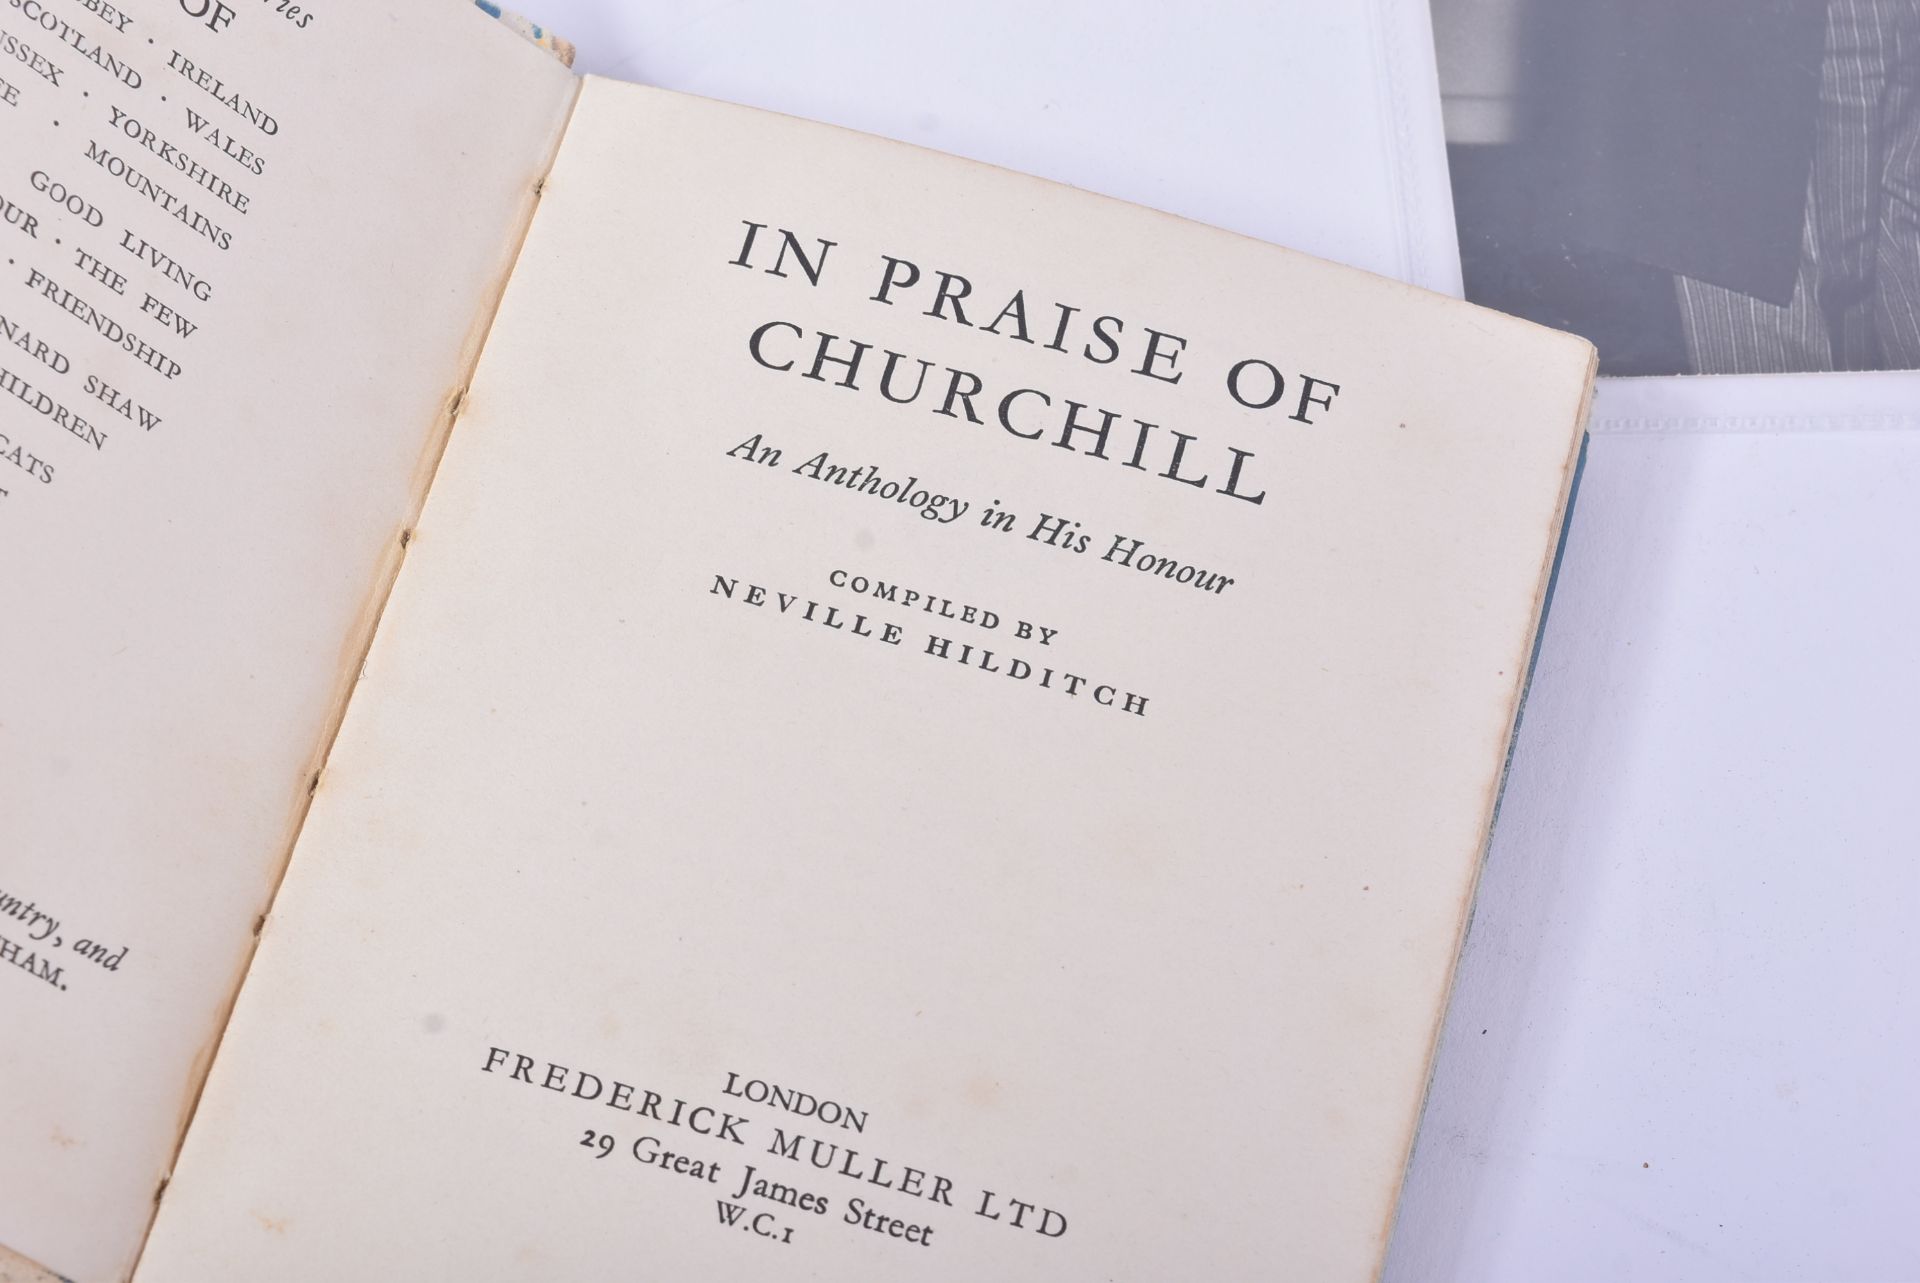 WINSTON CHURCHILL – FROM A PRIVATE COLLECTION - Image 14 of 14